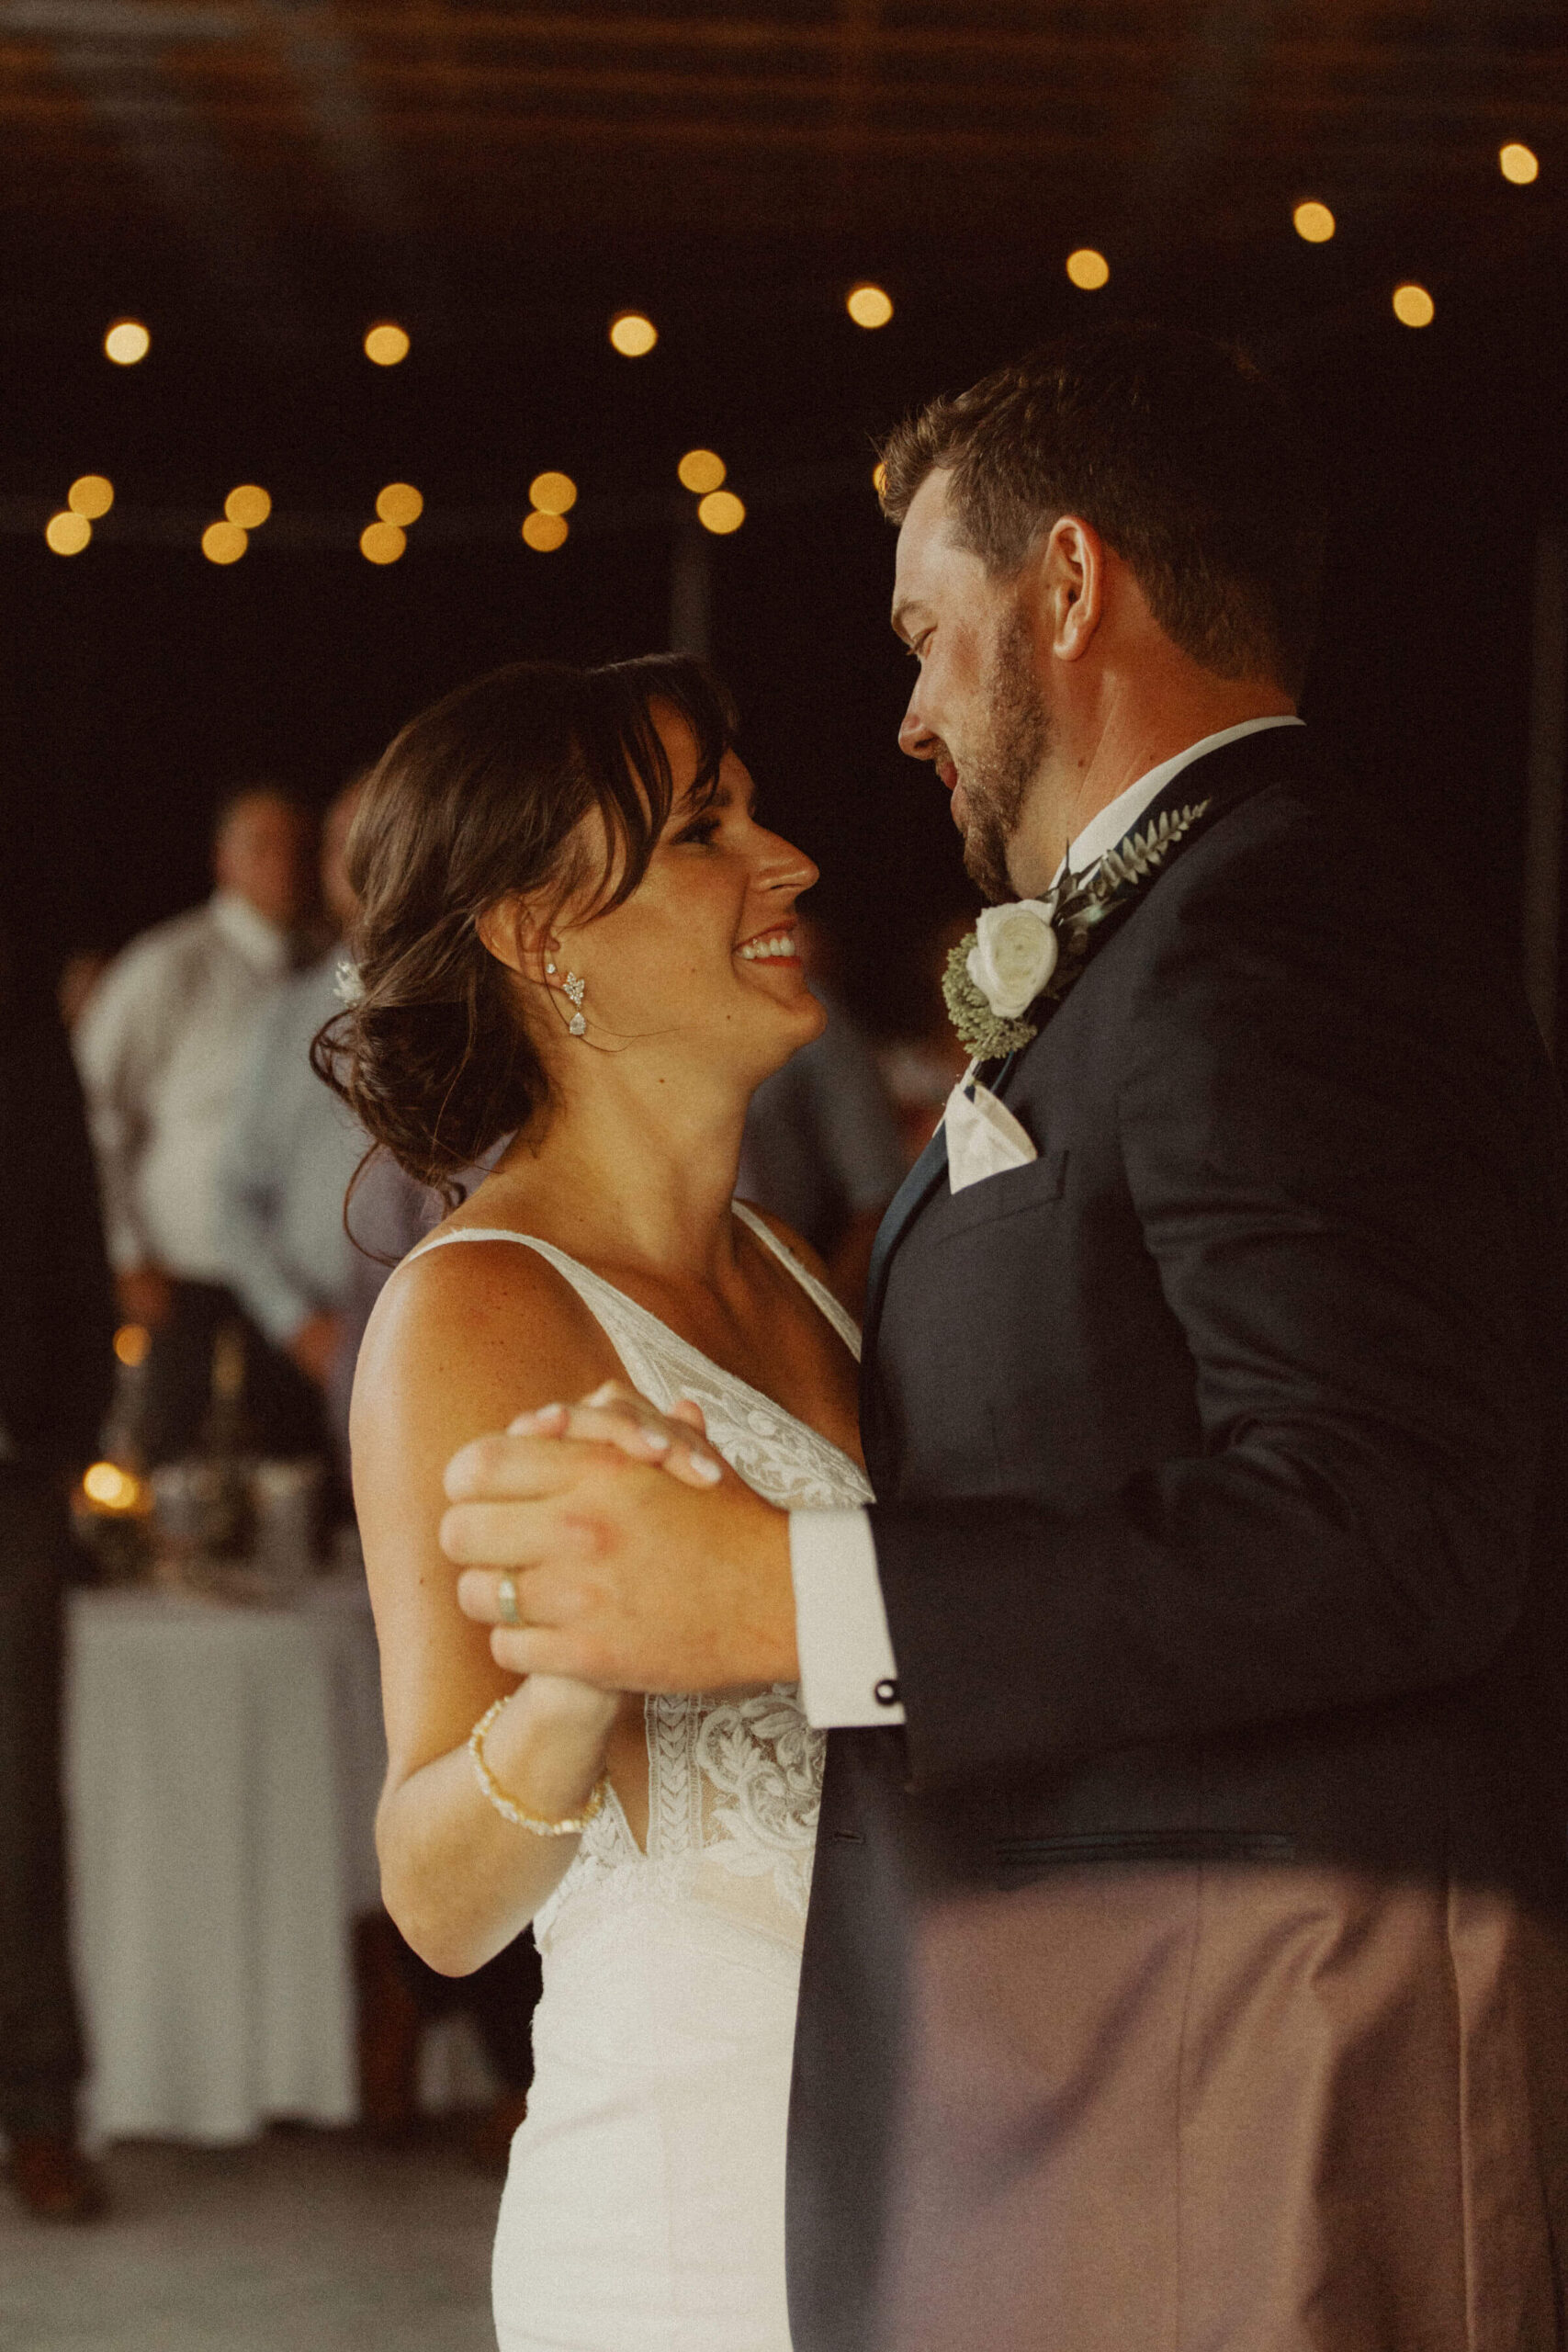 Bride and groom first dance at farm wedding reception